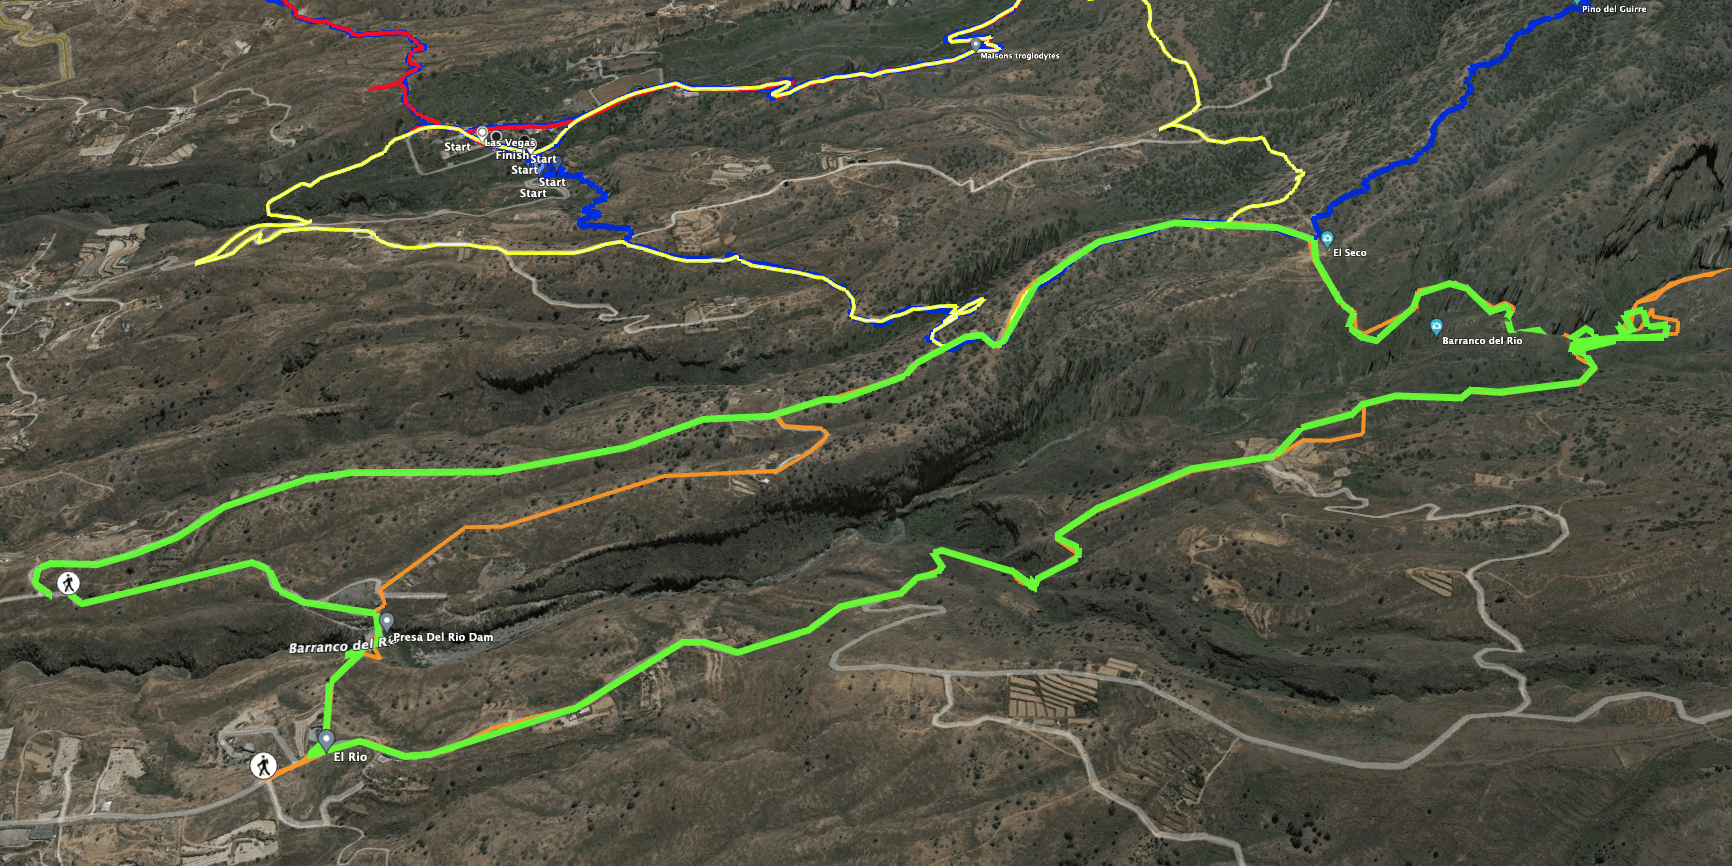 Track of the Presa del Río hike (green), orange the way back if you park to the right of the dam, Las Vegas hiking circuit (yellow and blue)